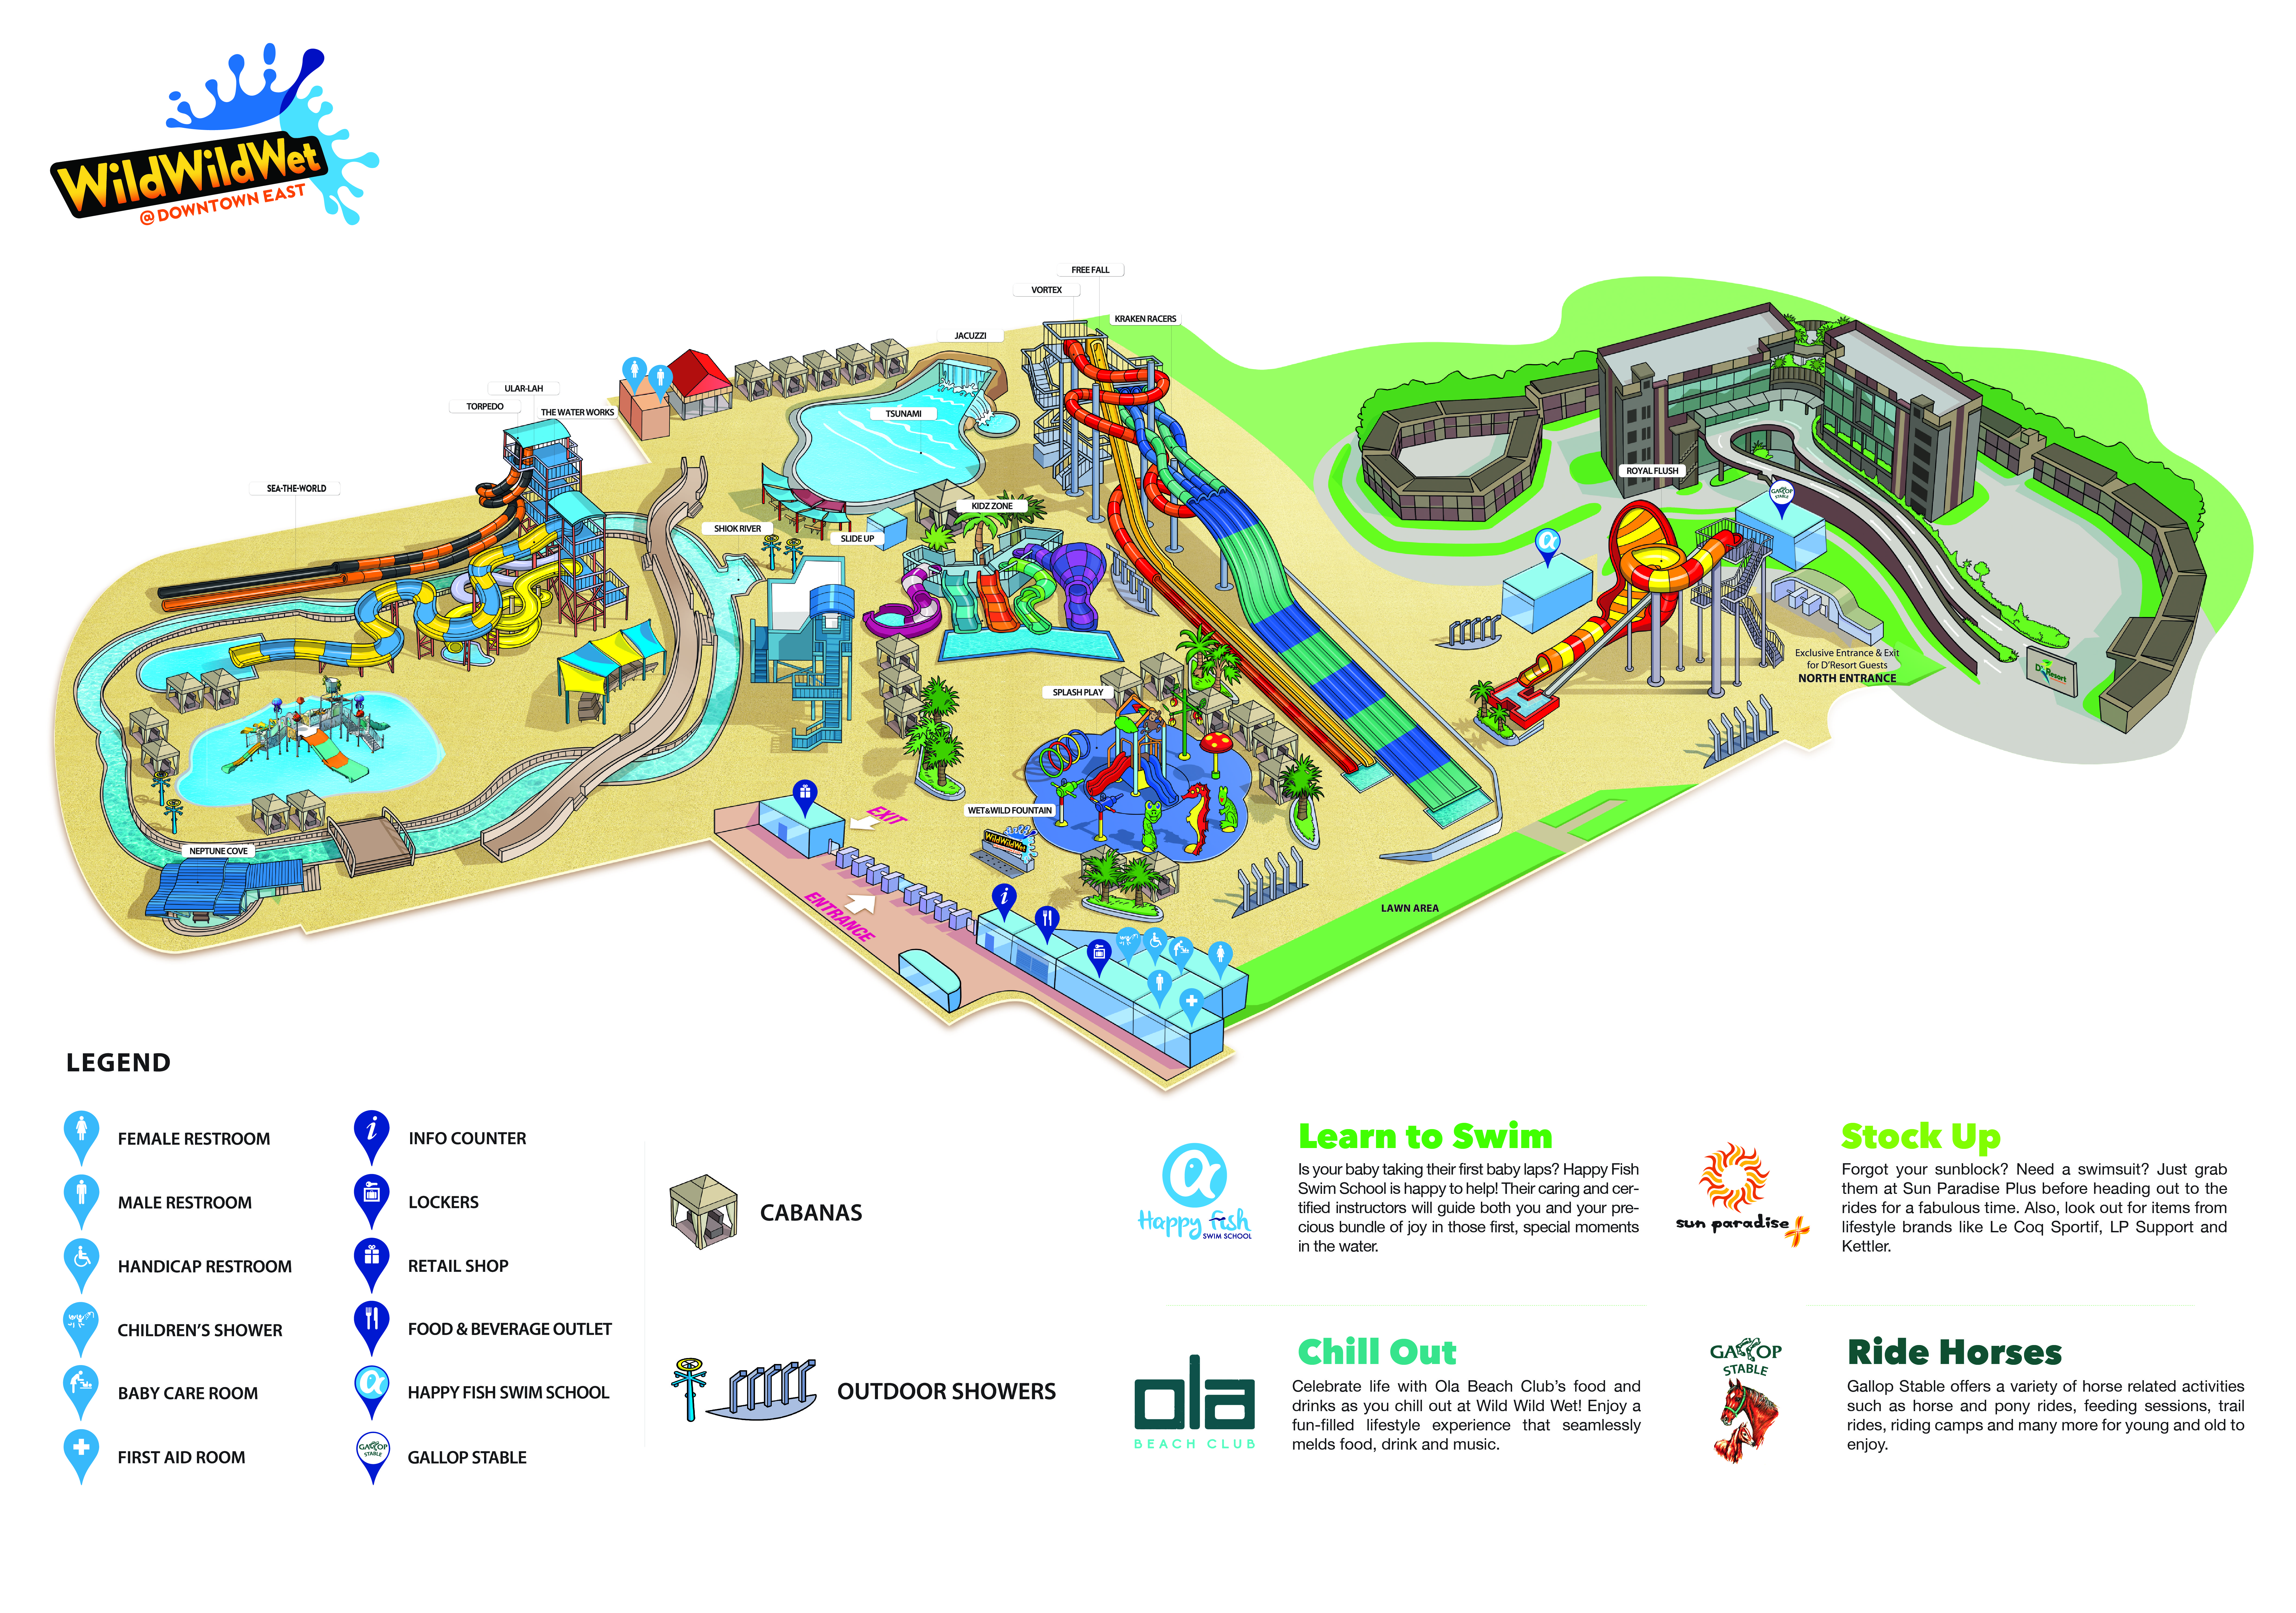 Wild Wild Wet water park Singapore map - water playground and facilities